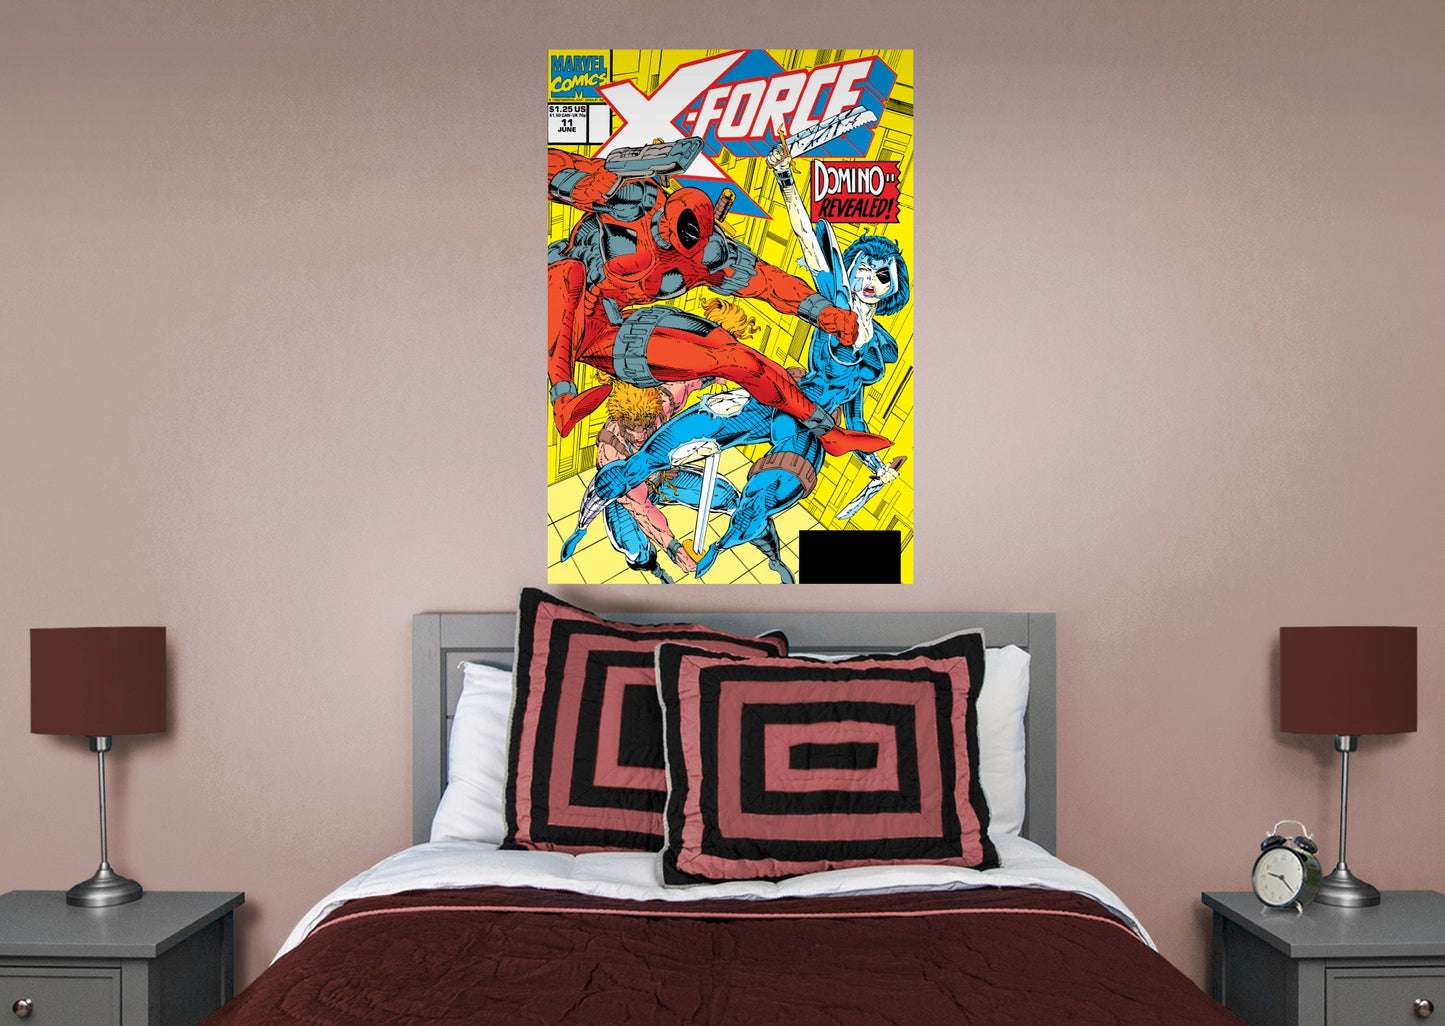 Deadpool:  Nerdy 30 X-Force #15 Domino Comic Cover Mural        - Officially Licensed Marvel Removable Wall   Adhesive Decal